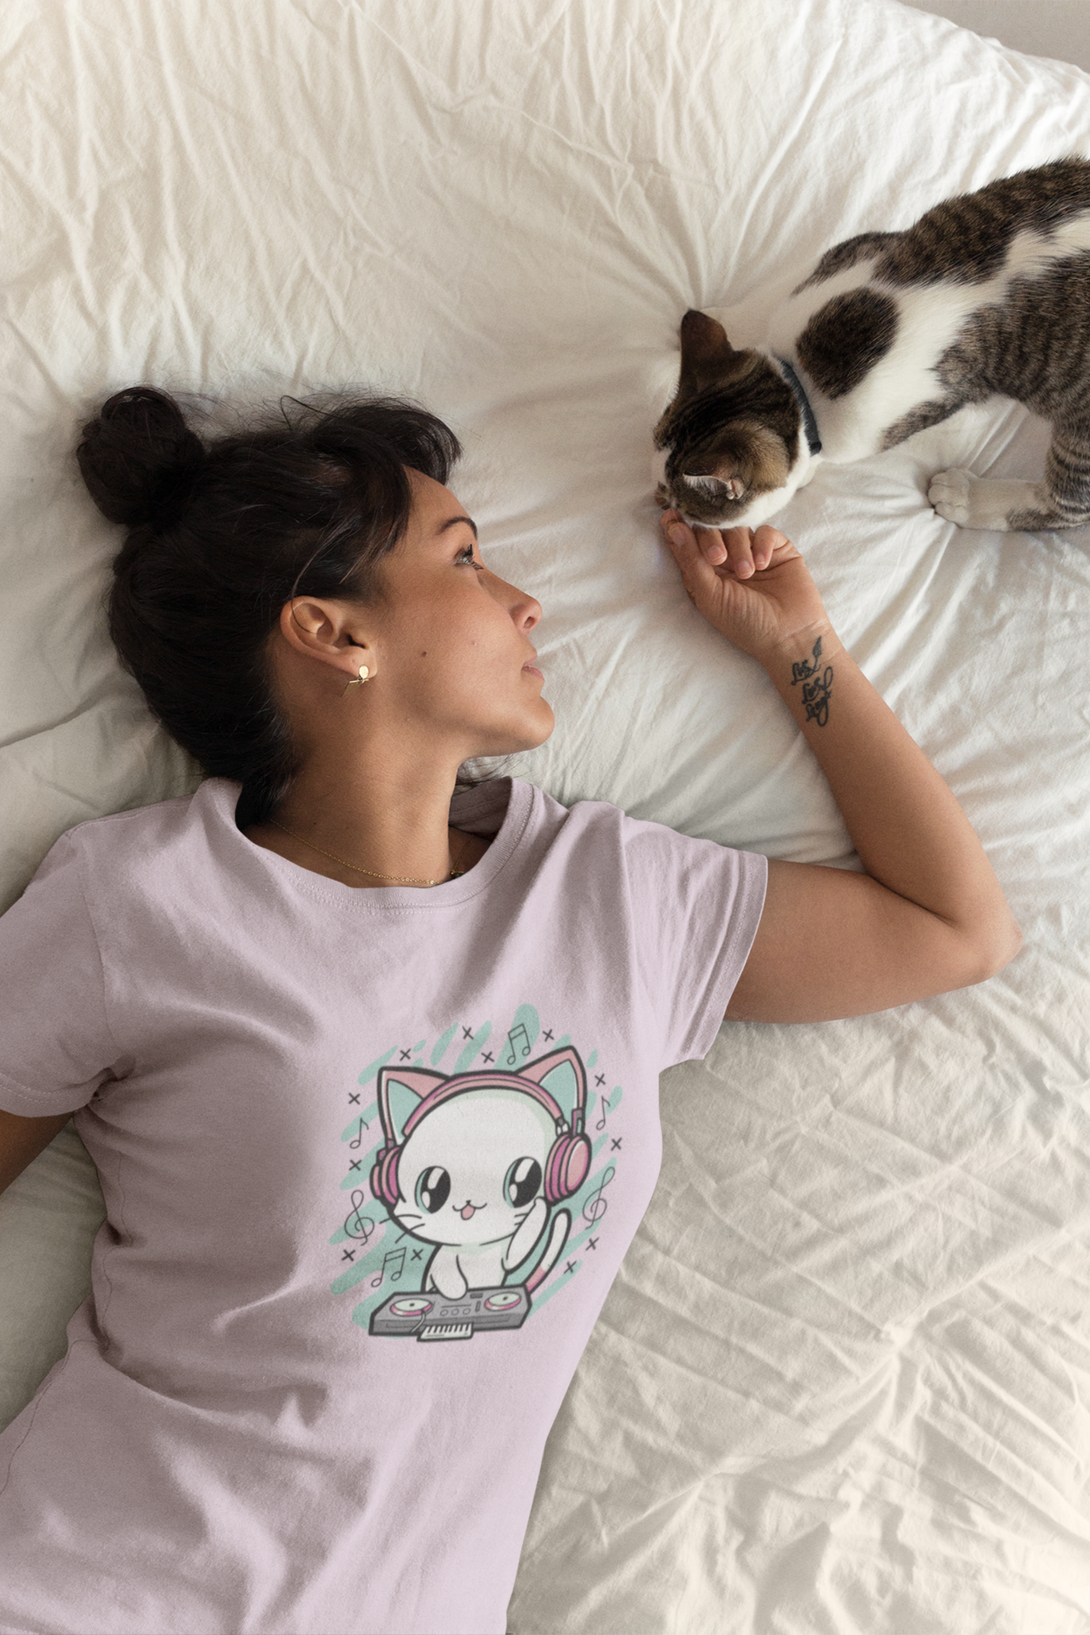 Meow Mix Printed T-Shirt For Women - WowWaves - 4